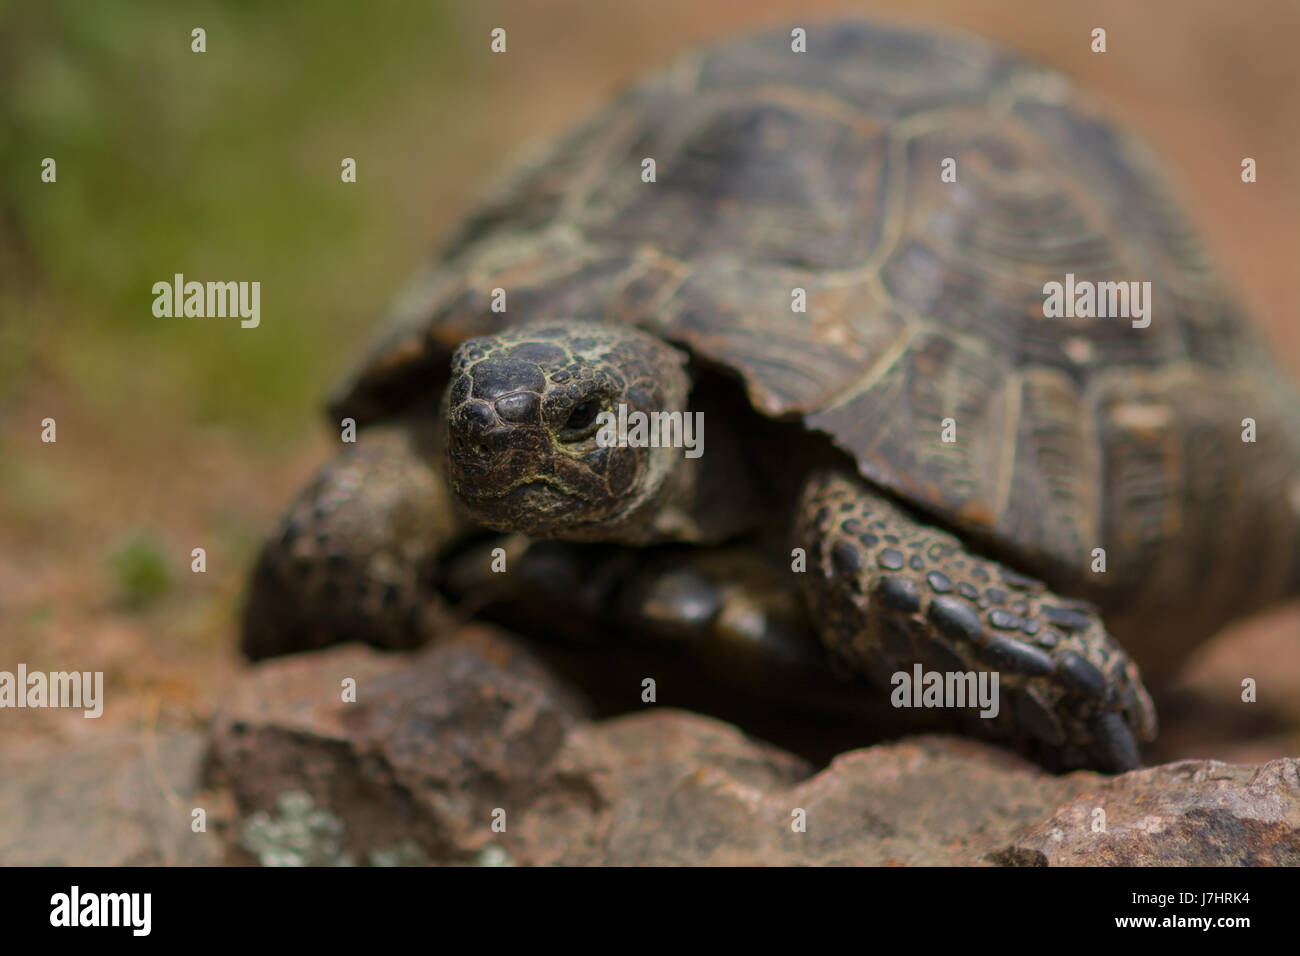 Close up shot of a baby tortoise Stock Photo